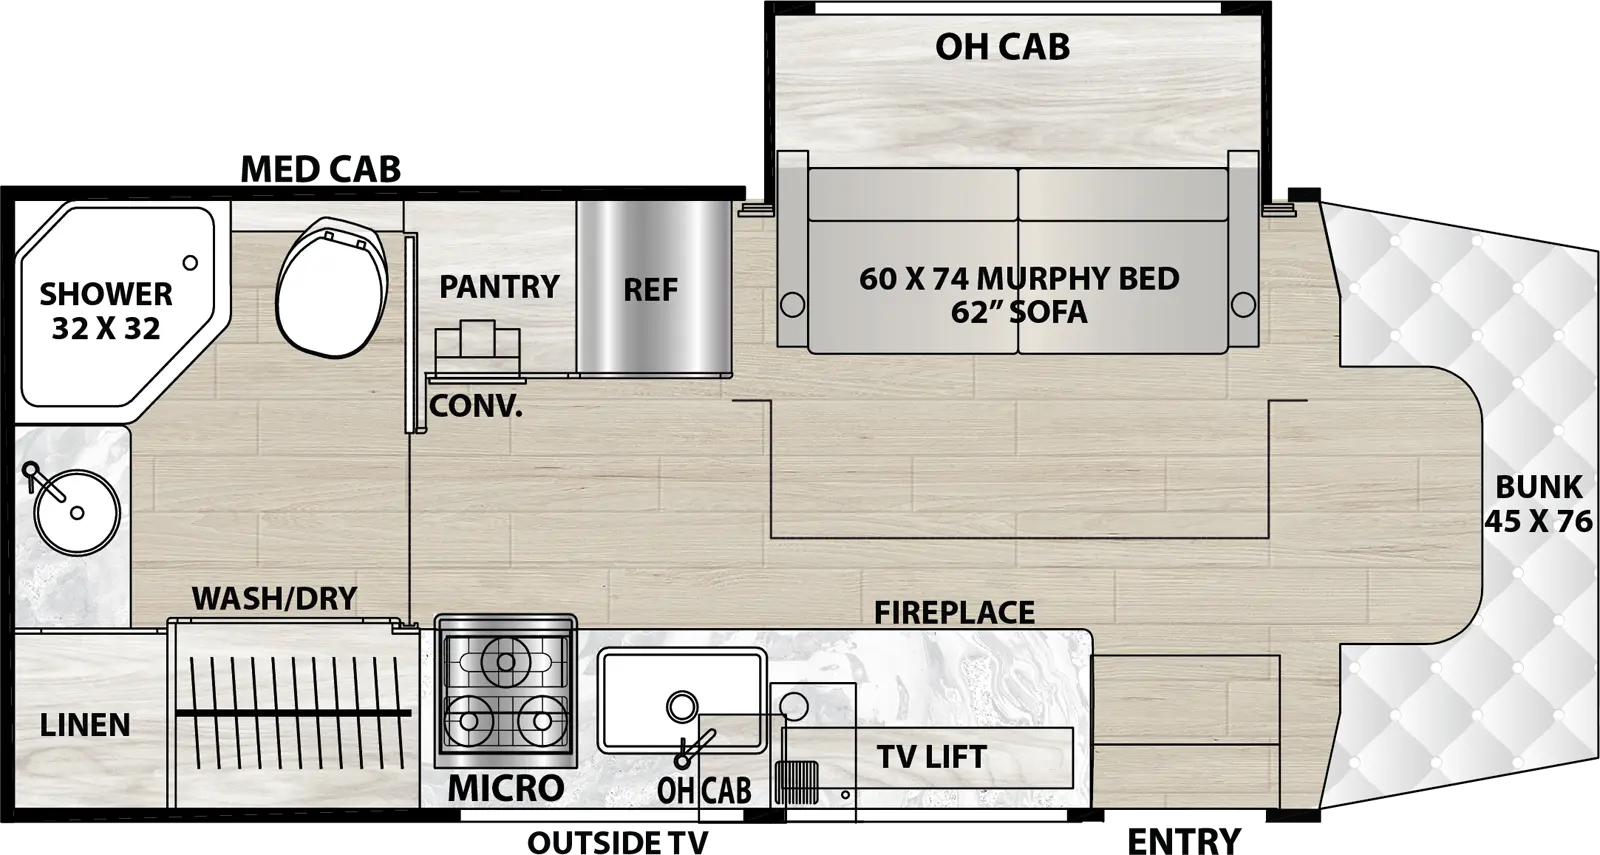 The 24MBE has one slideout and one entry. Exterior features an outside TV. Interior layout front to back: Front cab with cab-over bunk, off-door side slideout with overhead cabinet and murphy bed sofa; door side entry, fireplace with TV lift, sink, overhead cabinet, microwave and cooktop; off-door side refrigerator and pantry; bathroom with off door side shower, toilet and medicine cabinet, rear sink, and door side linen closet, and closet with washer/dryer.